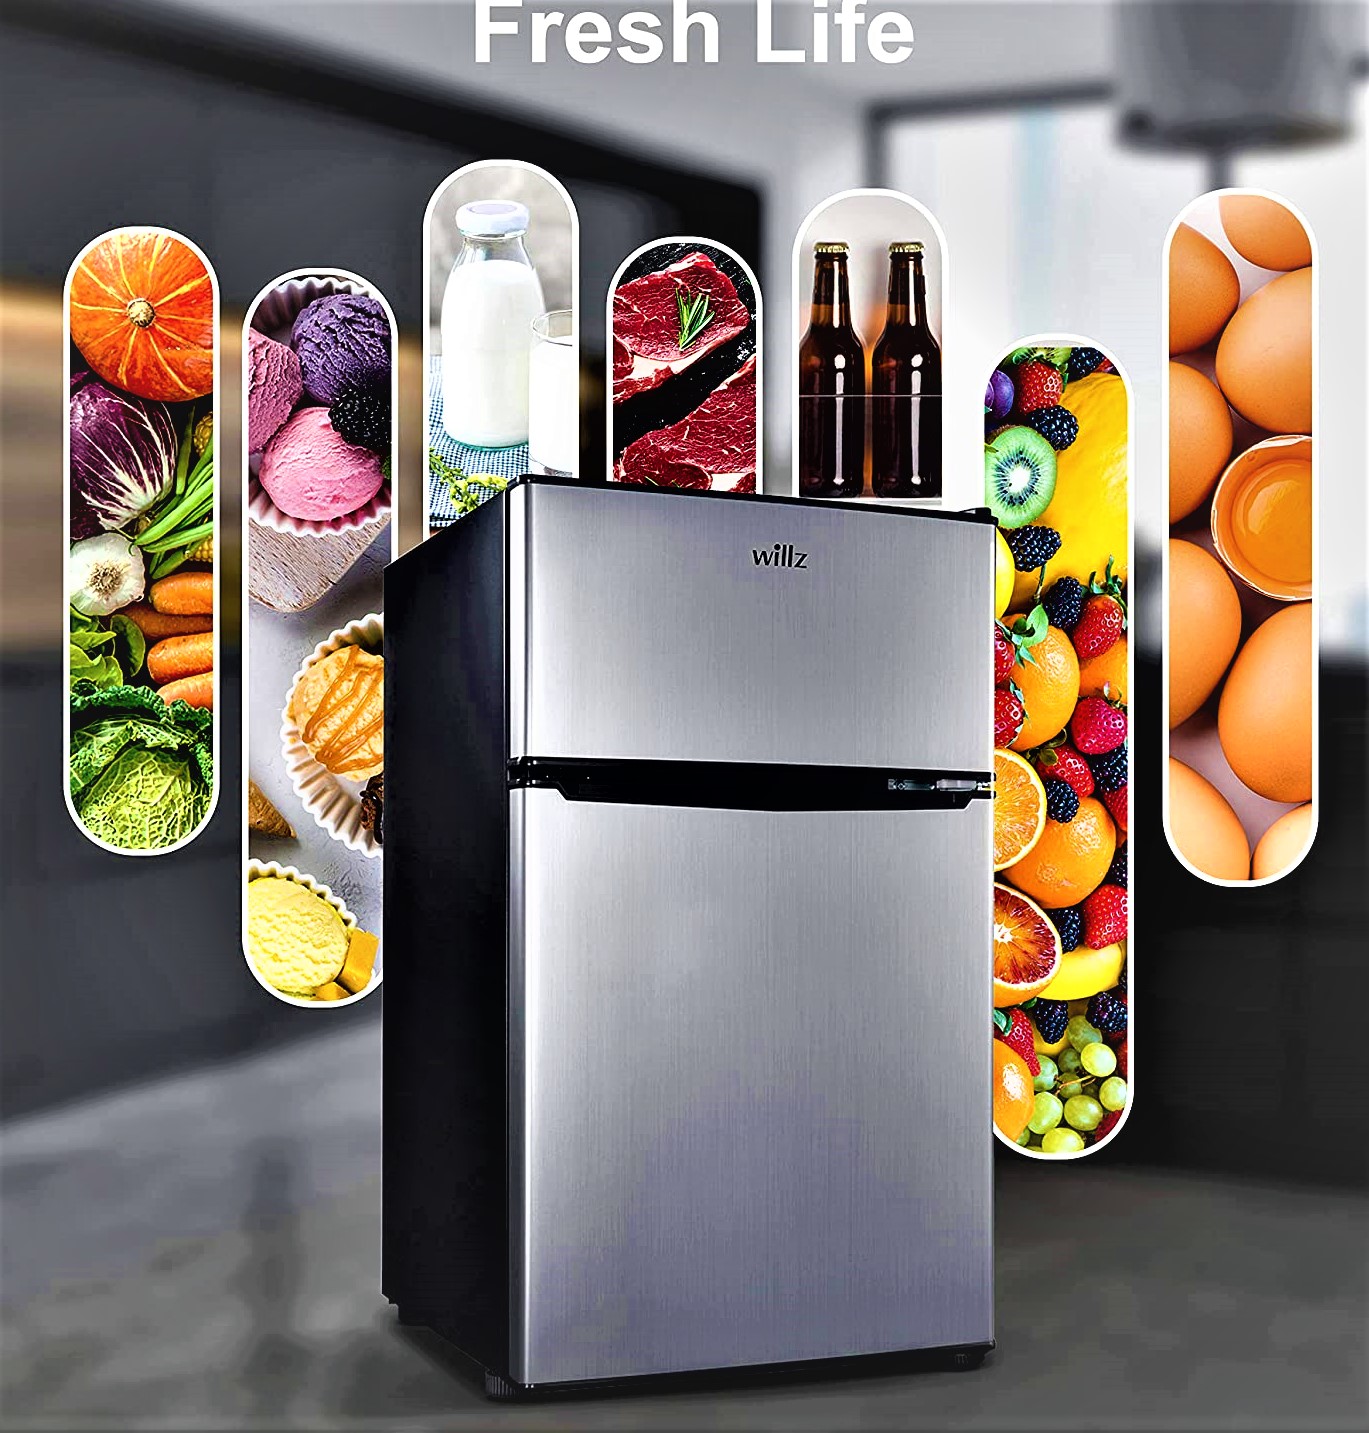 10 BEST MINI FRIDGE WITH FREEZER in 2022 REVIEW and Compared All In One Cooling Gear Lab: Any Refrigerators Air Conditioners Freezers Ice Makers Coolers Fans Reviewed And Compared.